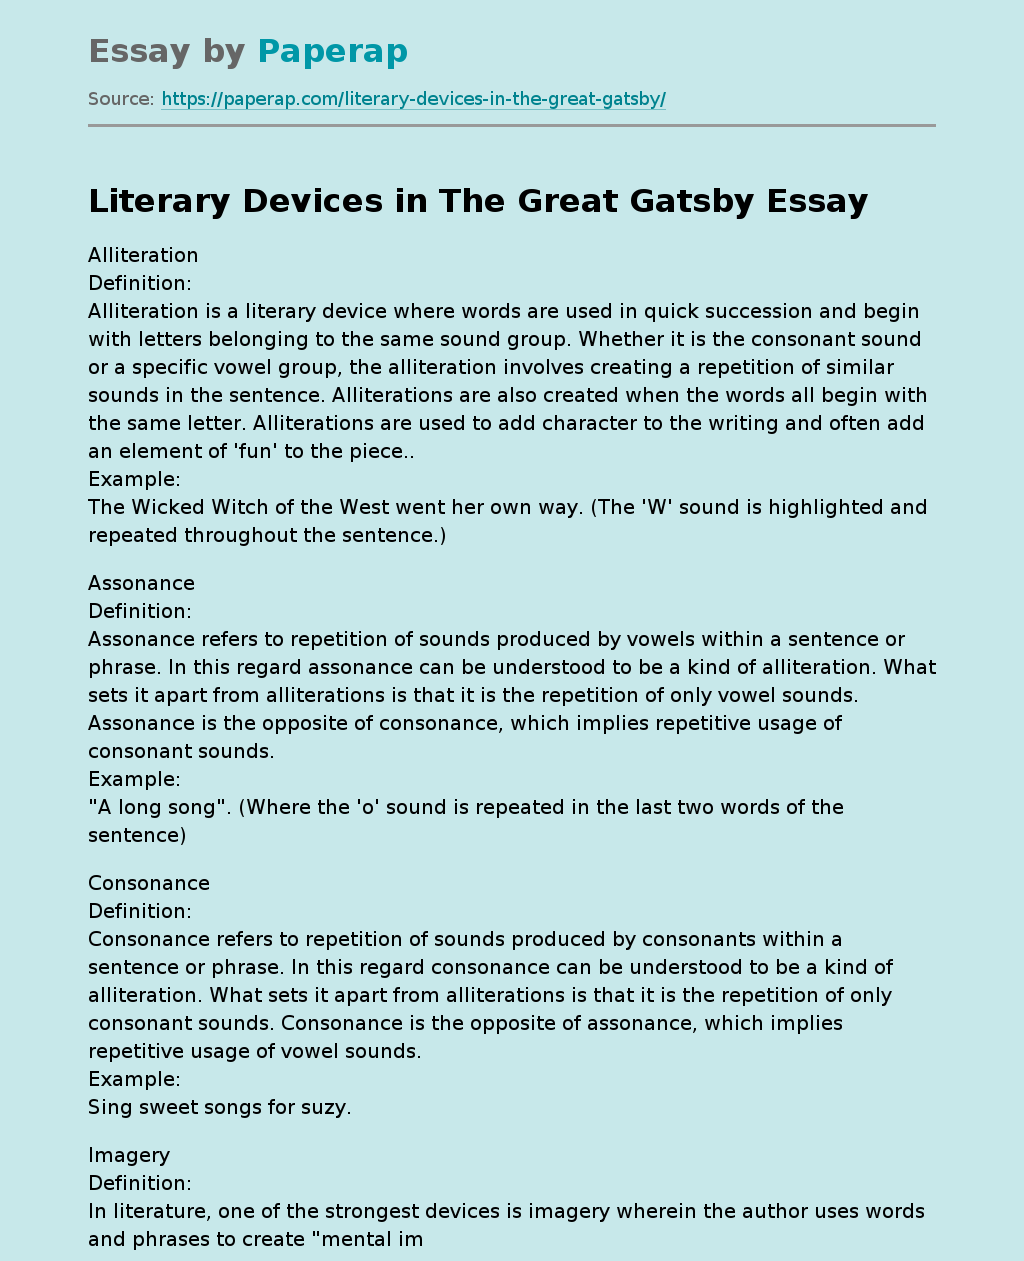 Literary Devices in The Great Gatsby